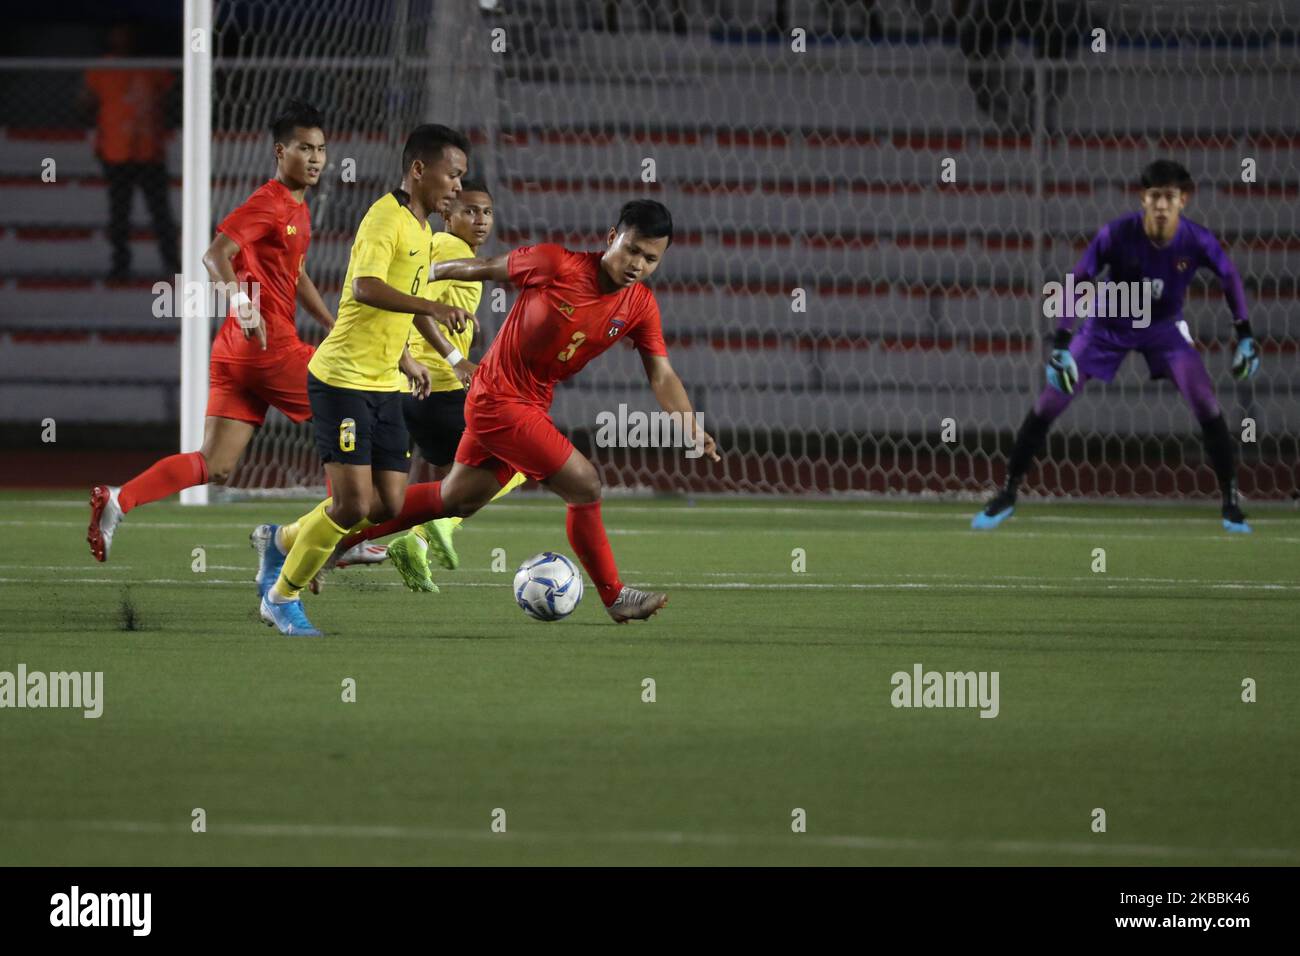 Ye Min Thu (3) of Myanmar and Muhammad Danial Haqim Aman of Malaysia in action during the elimination round of the Men’s football for the 30th South East Asian Games held at the Rizal Memorial Complex in Manila, Philippines on November 25, 2019. (Photo by George Calvelo/NurPhoto) Stock Photo